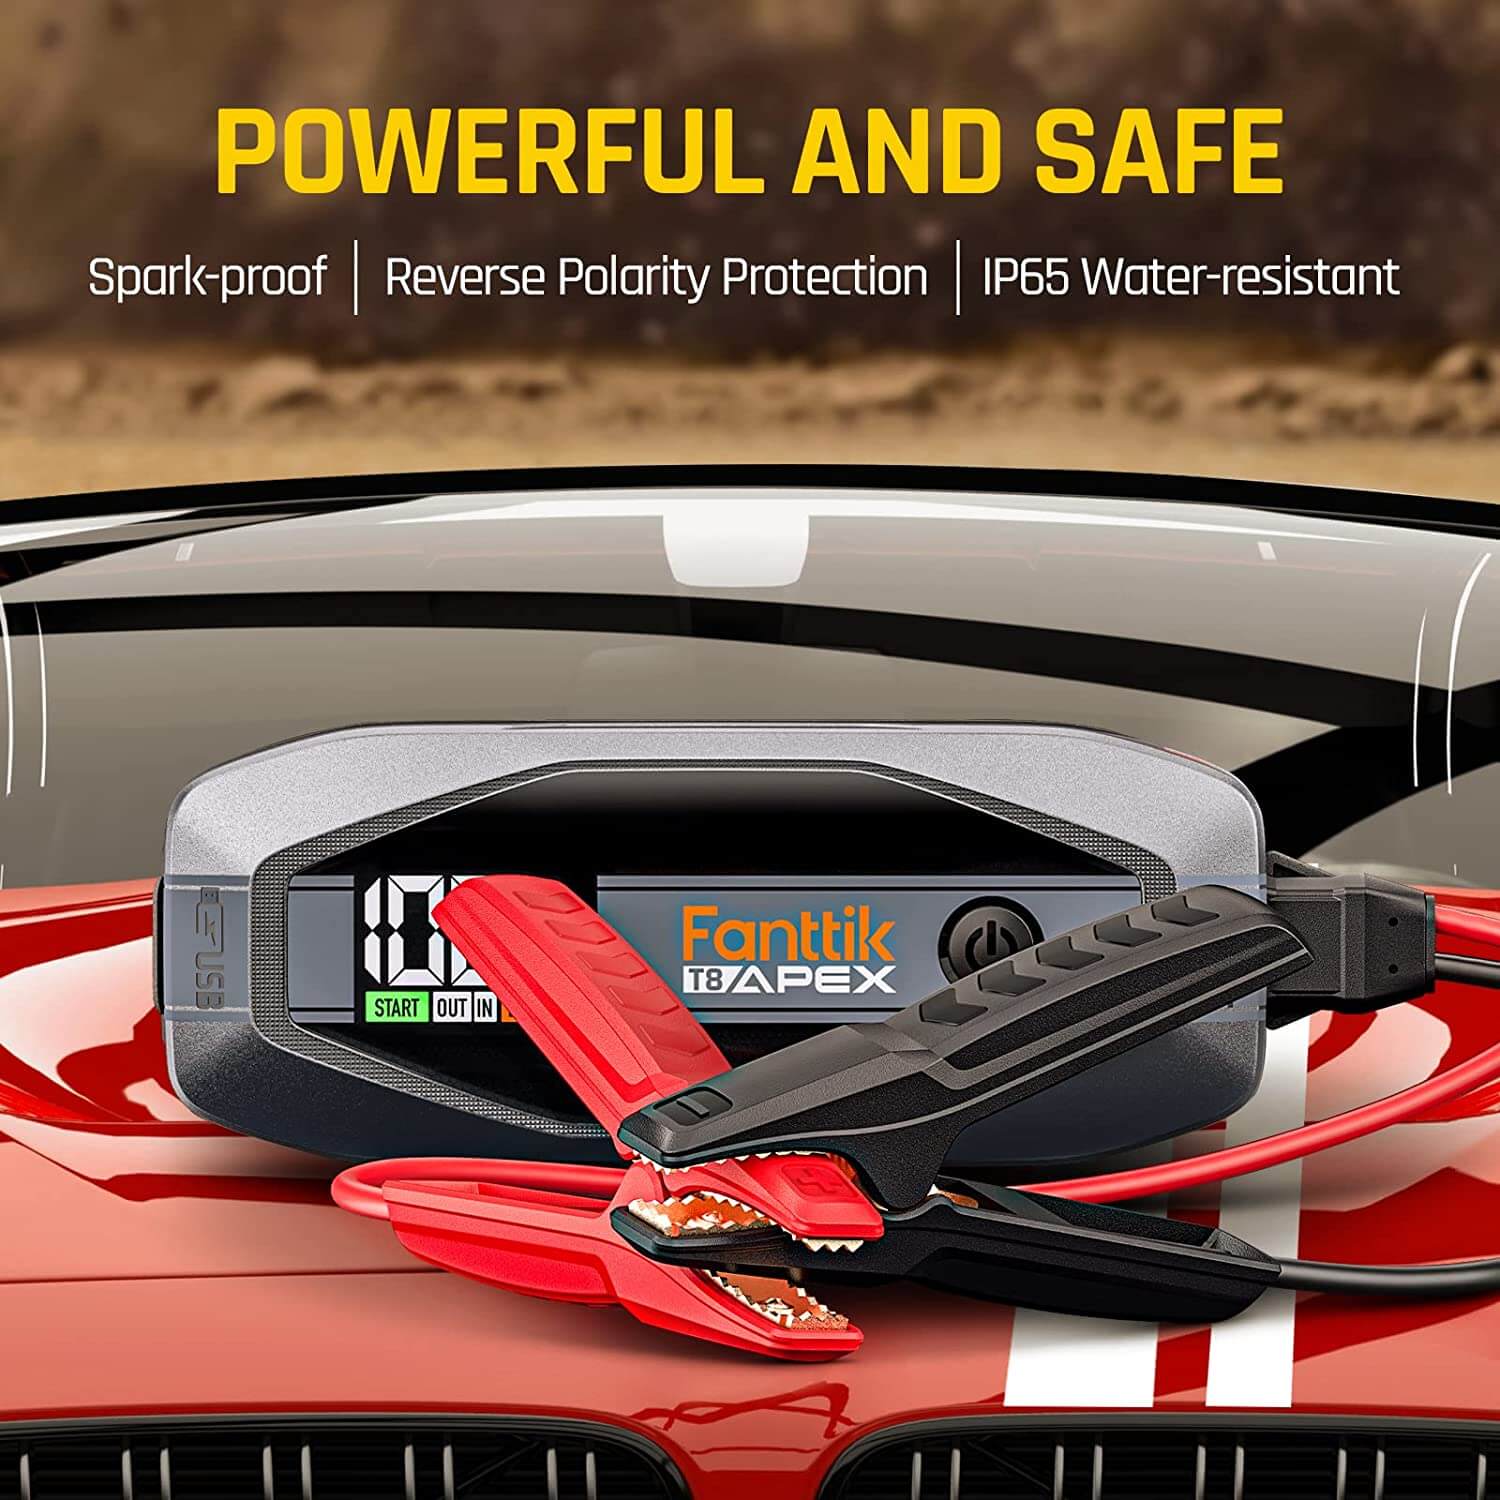 Fanttik T8 APEX 2000 Amp Jump Starter features 3.0 inches smart screen for convenient use, this portable car jump starter pack can intelligently detect and display the battery voltage in real time, and the remaining battery level, to get you know everything at a glance.